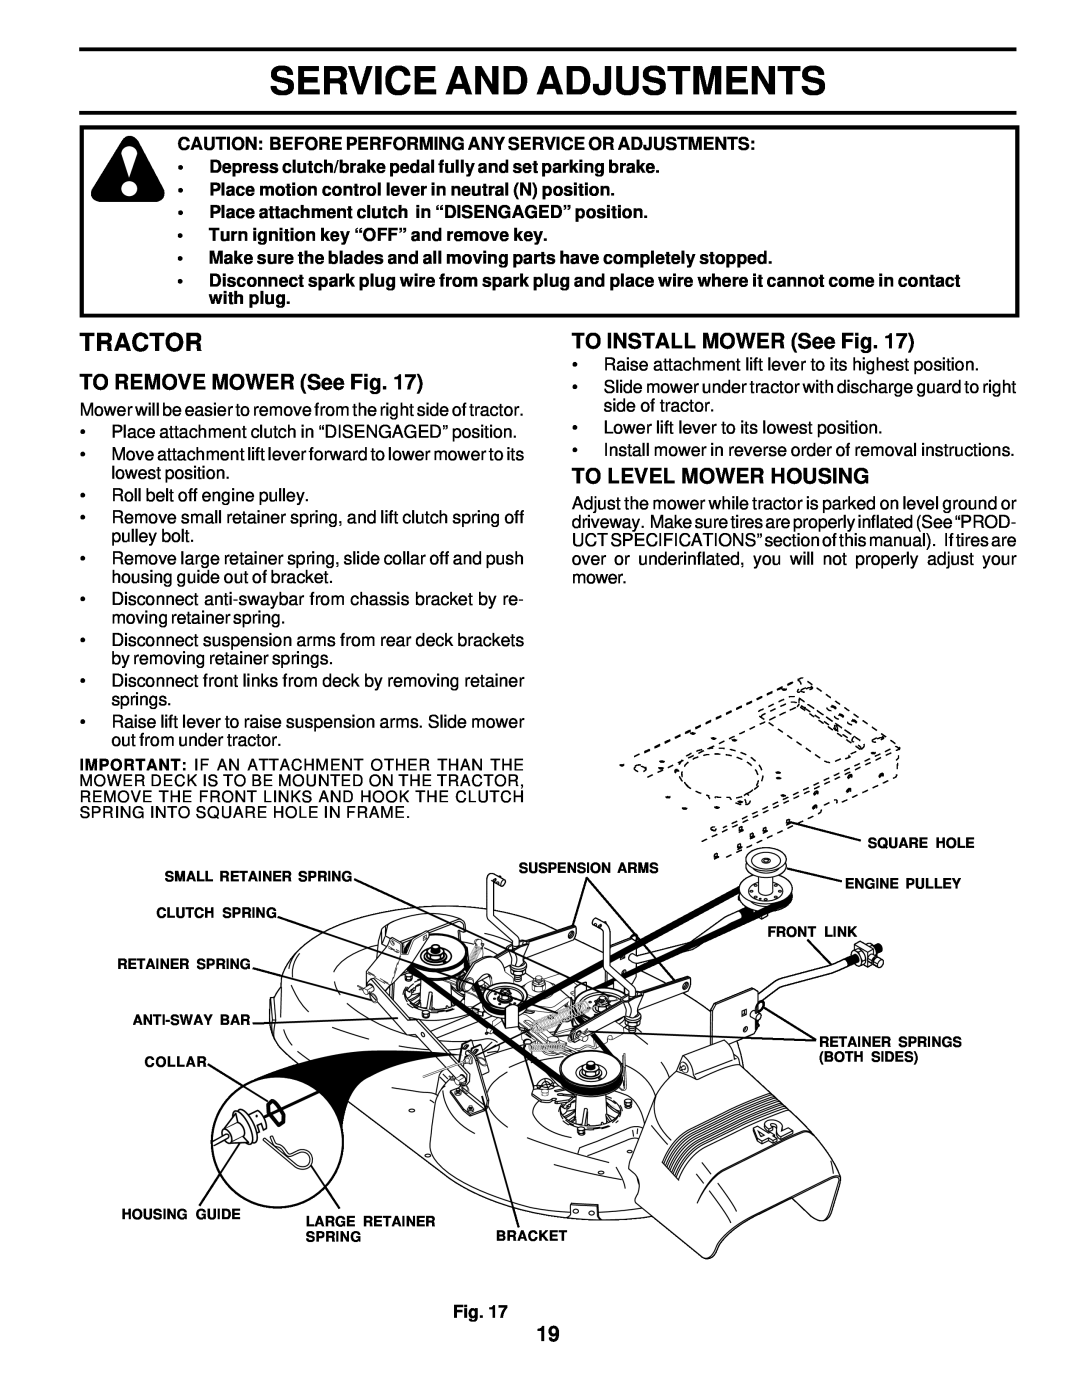 Poulan 178227 Service And Adjustments, TO REMOVE MOWER See Fig, TO INSTALL MOWER See Fig, To Level Mower Housing, Tractor 